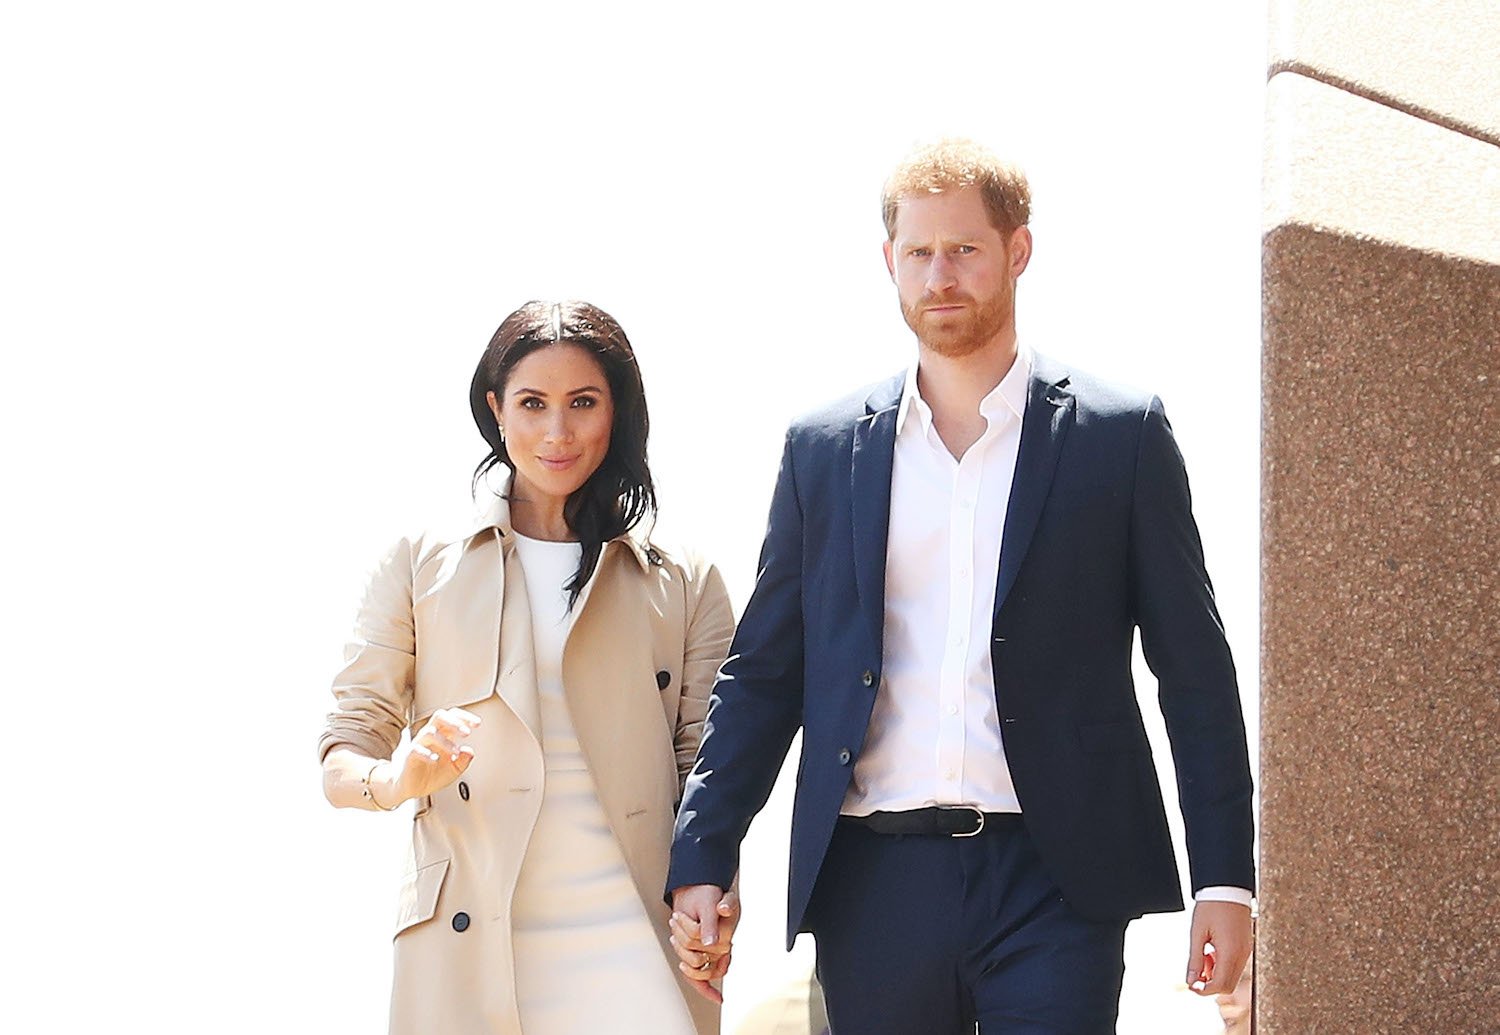 Prince Harry and Meghan Markle meet the public at Sydney Opera House on October 16, 2018 in Sydney, Australia